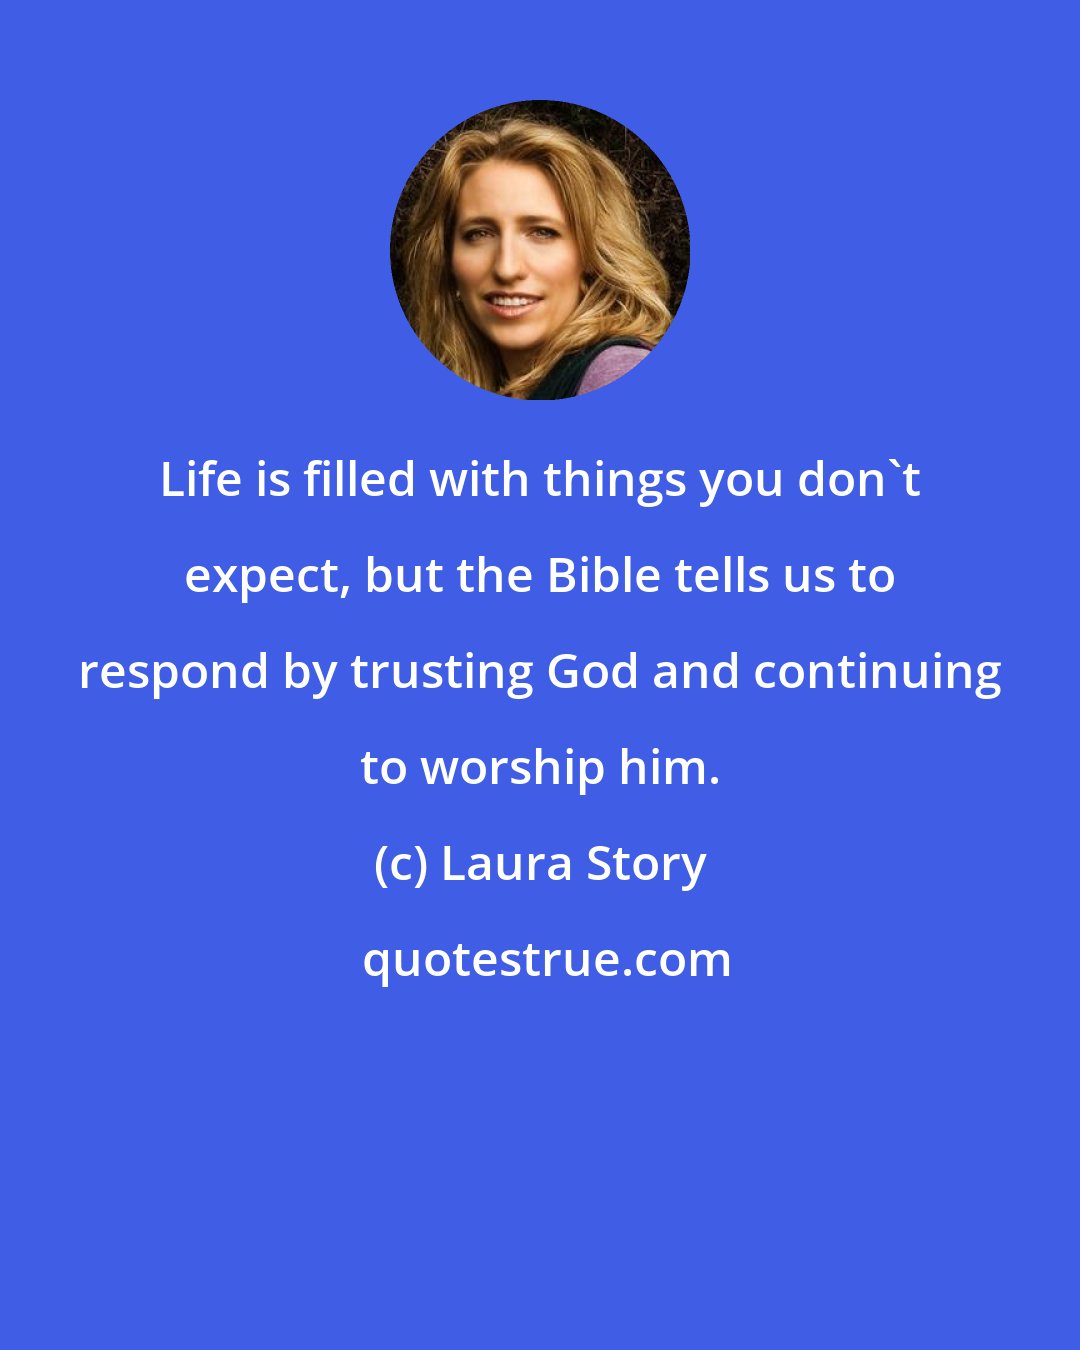 Laura Story: Life is filled with things you don't expect, but the Bible tells us to respond by trusting God and continuing to worship him.